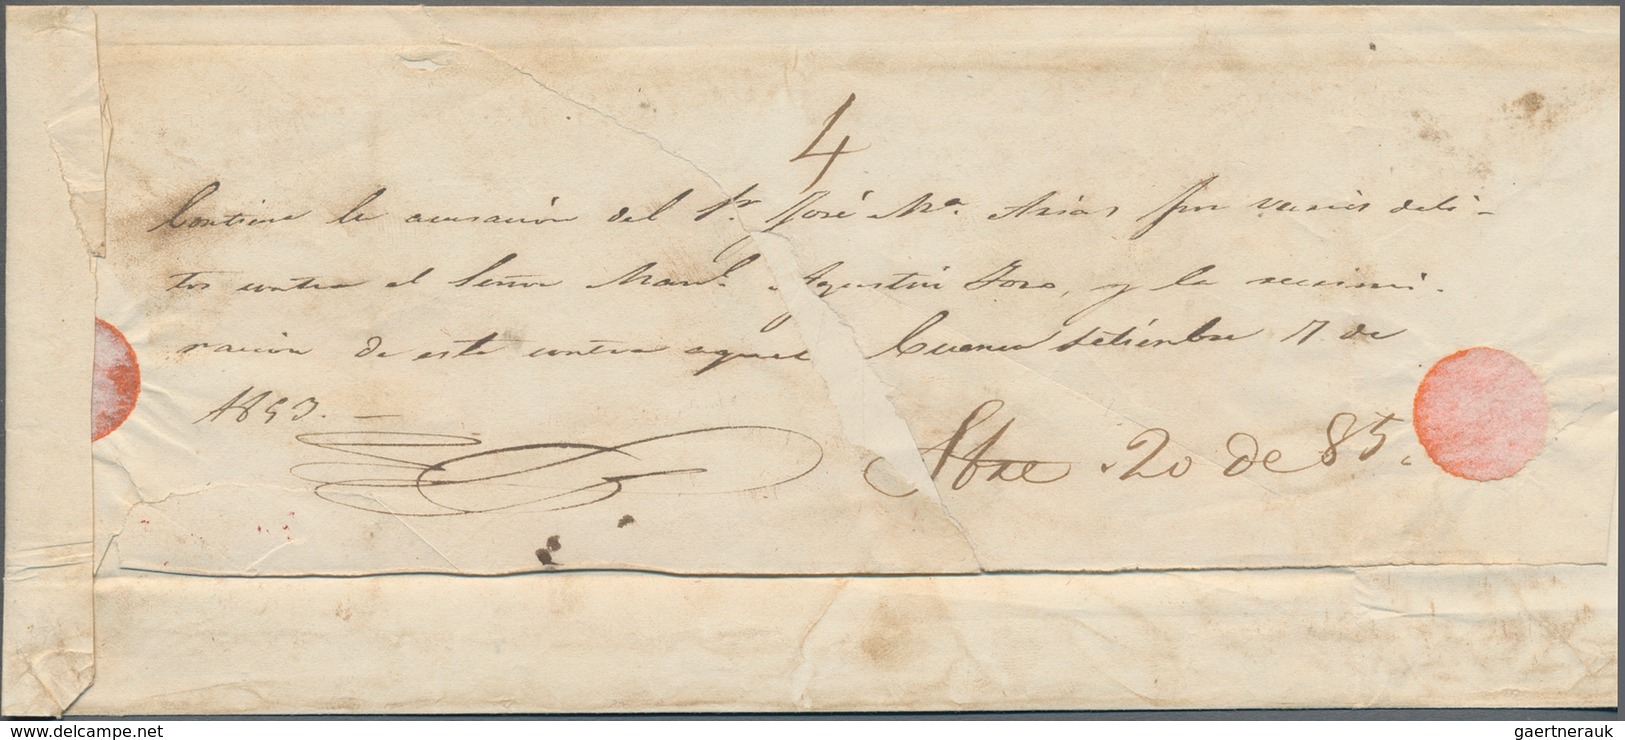 Ecuador: 1830's-1850: Four covers/letters from CUENCA bearing different oval handstamps in red, i.e.